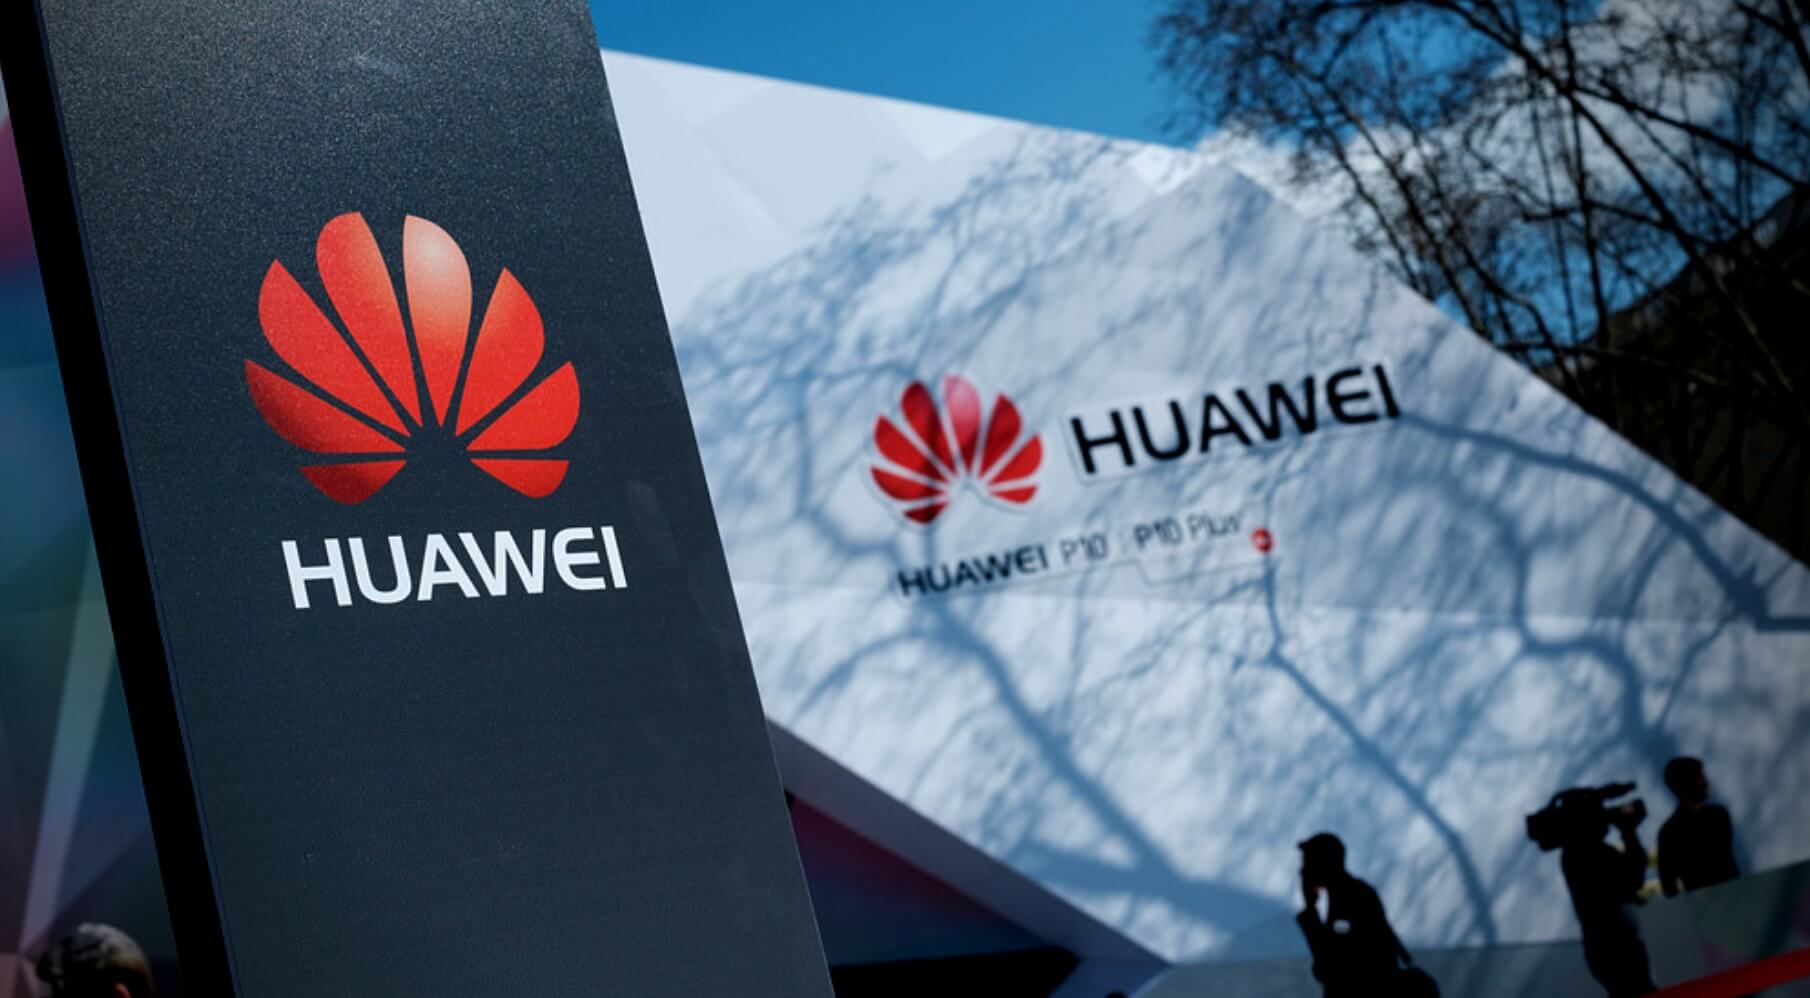 huawei-event-launch-wp